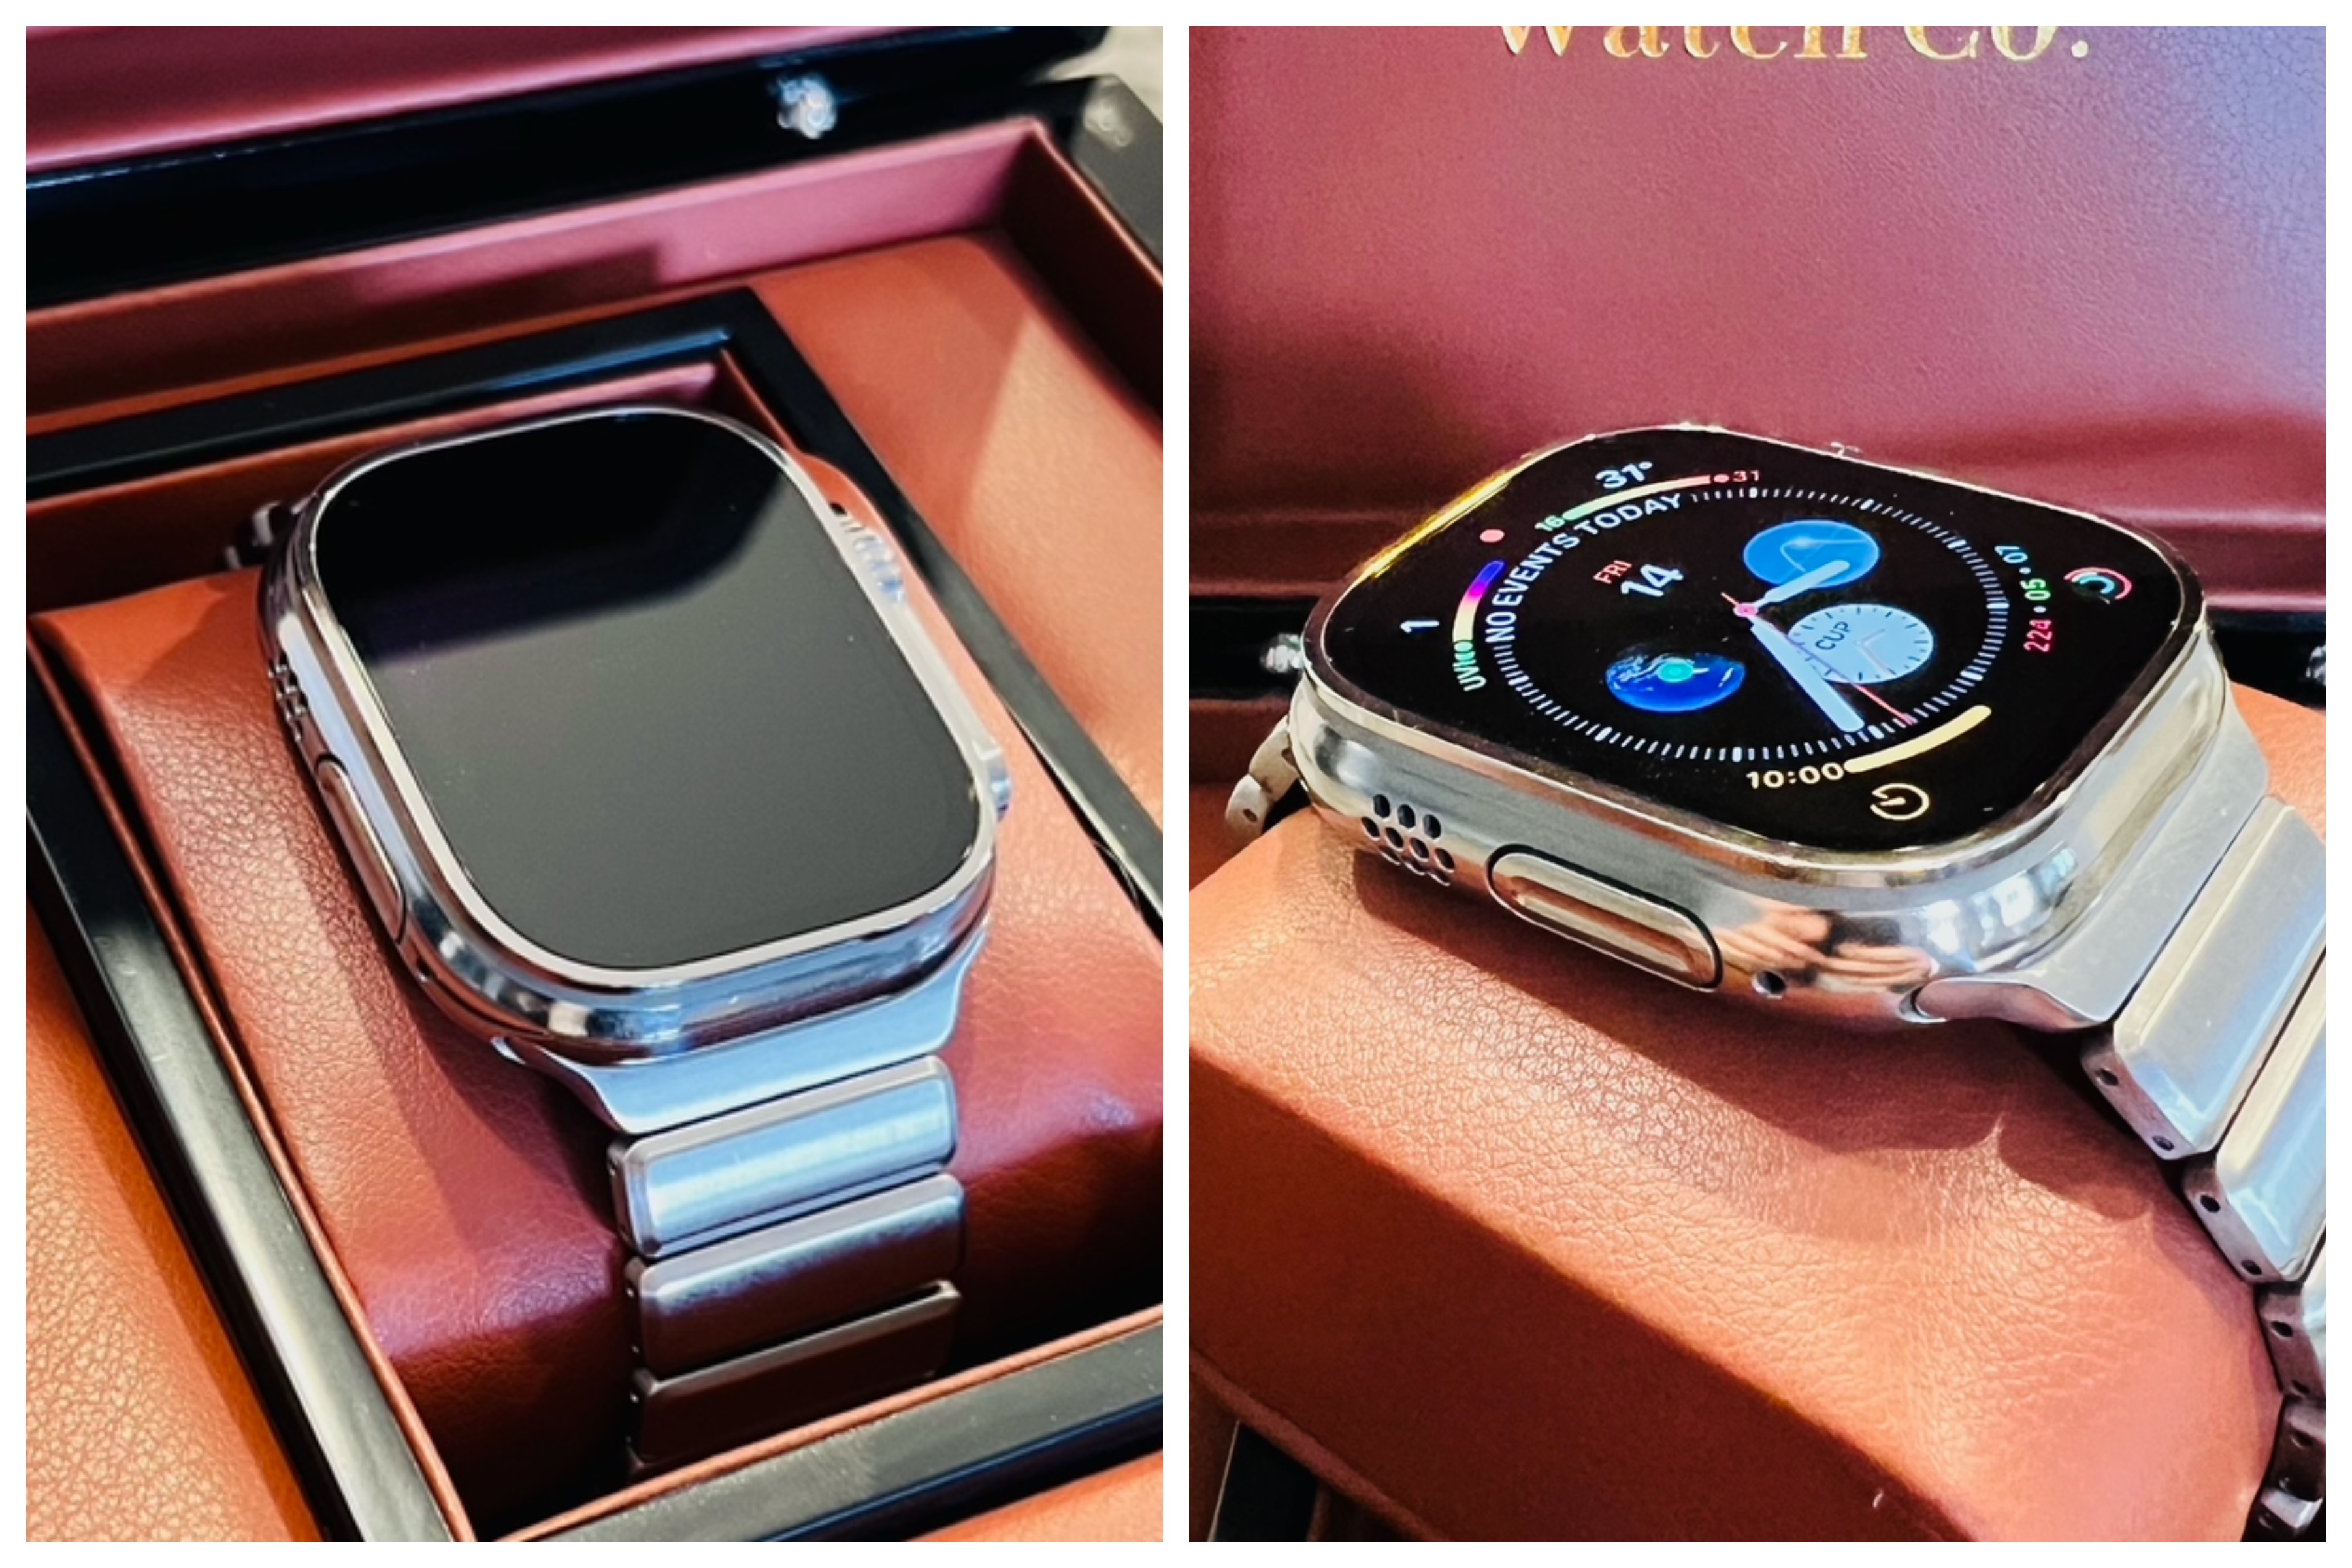 Apple Watch Ultra gets a gaudy polished design for $1,500 